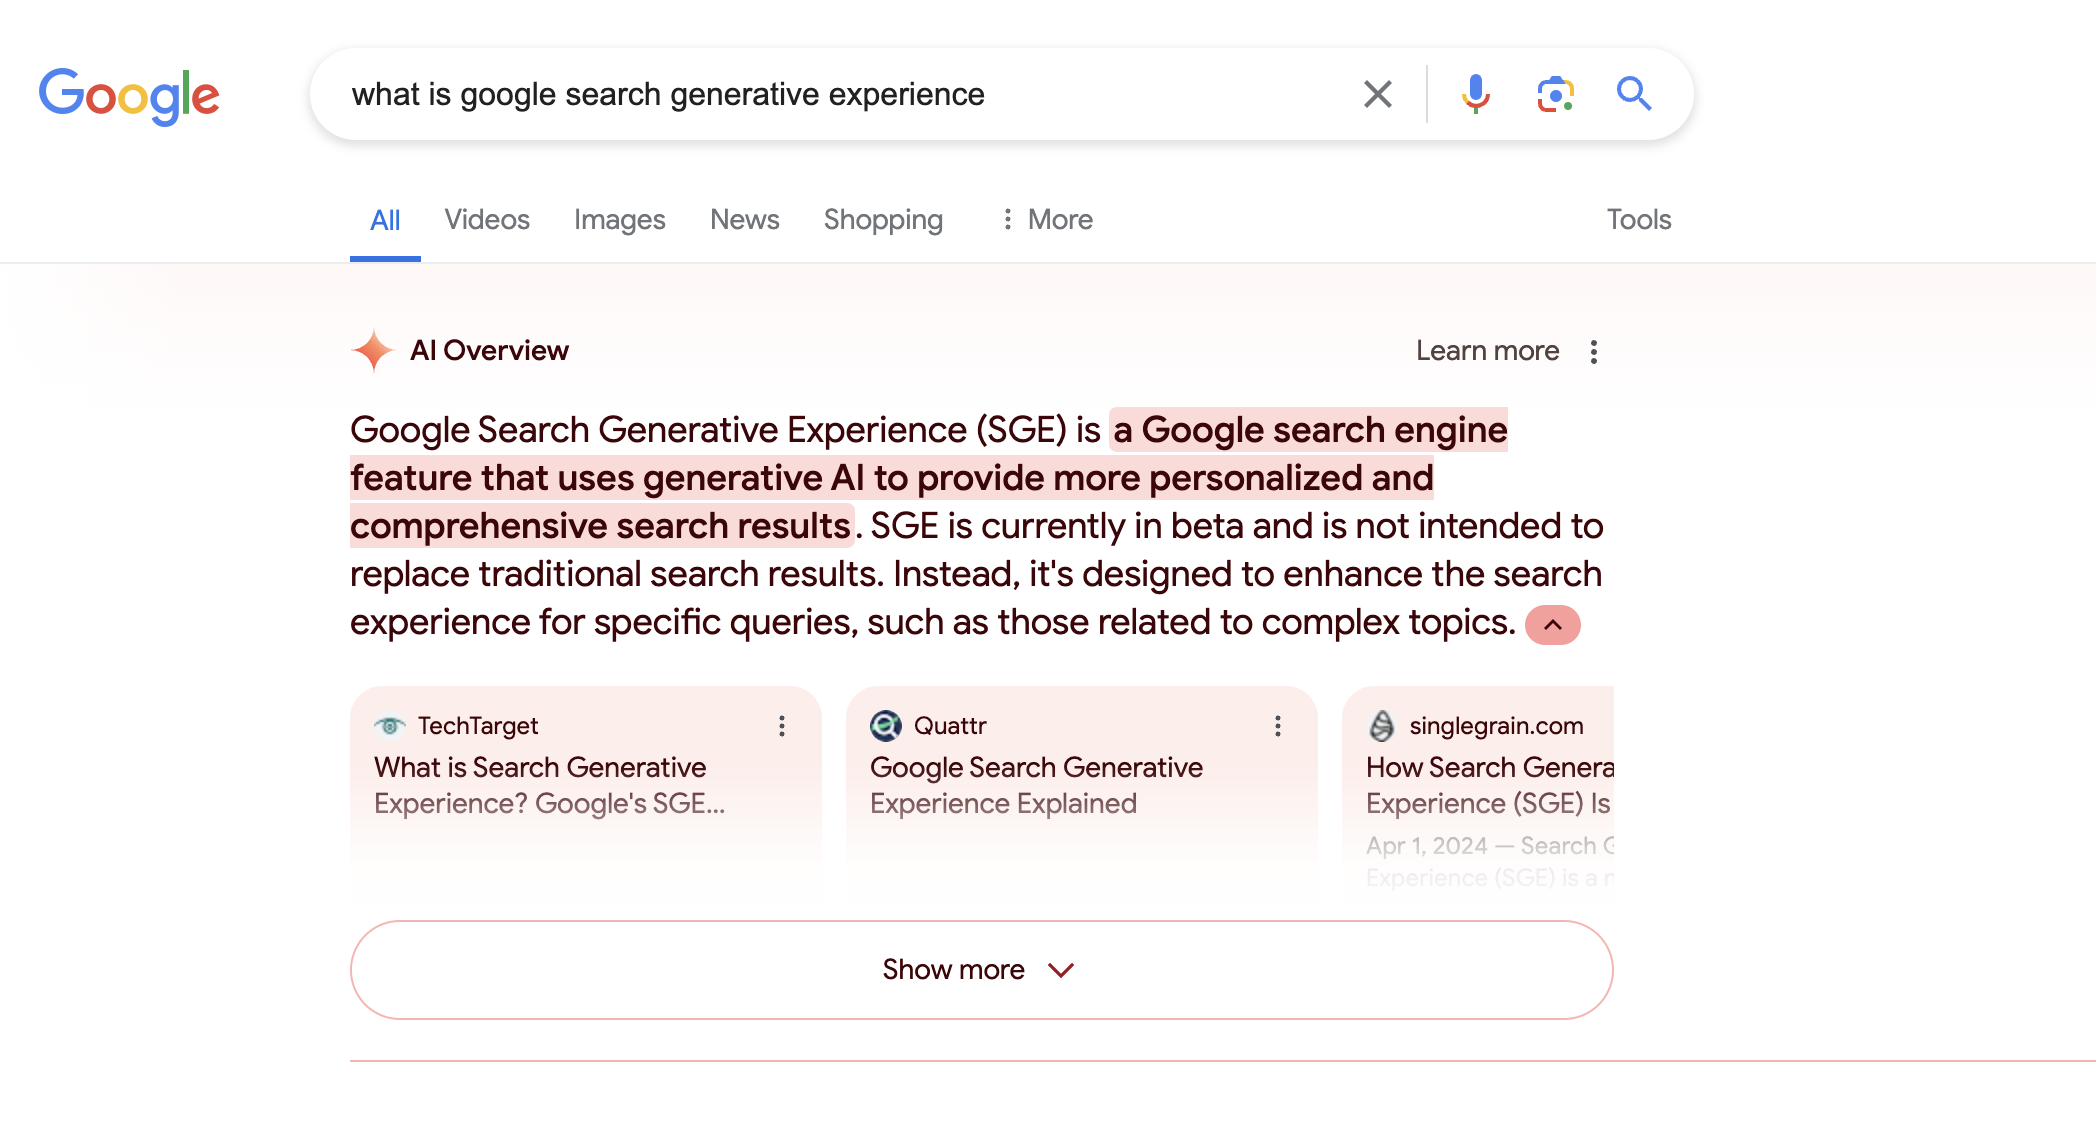 A Google Ai Overview for the search query "What is Google Search Generative Experience?"